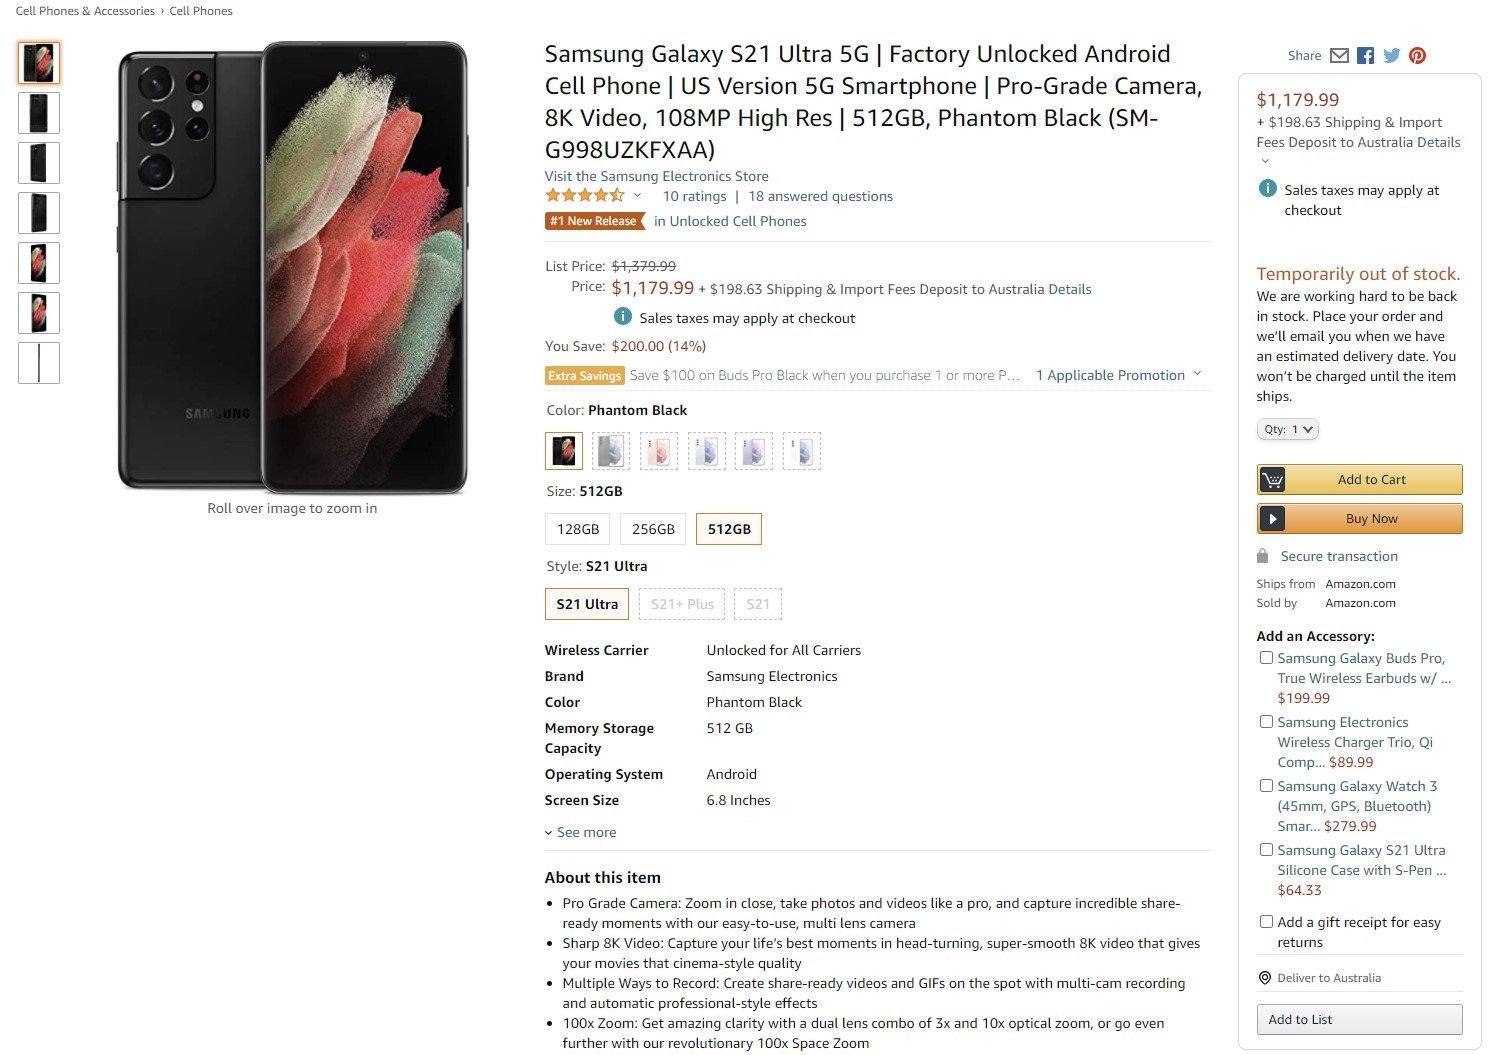 Amazon 512GB S21  Why Are Aussies Not Getting Americas Big Samsung Galaxy S21 Discounts?